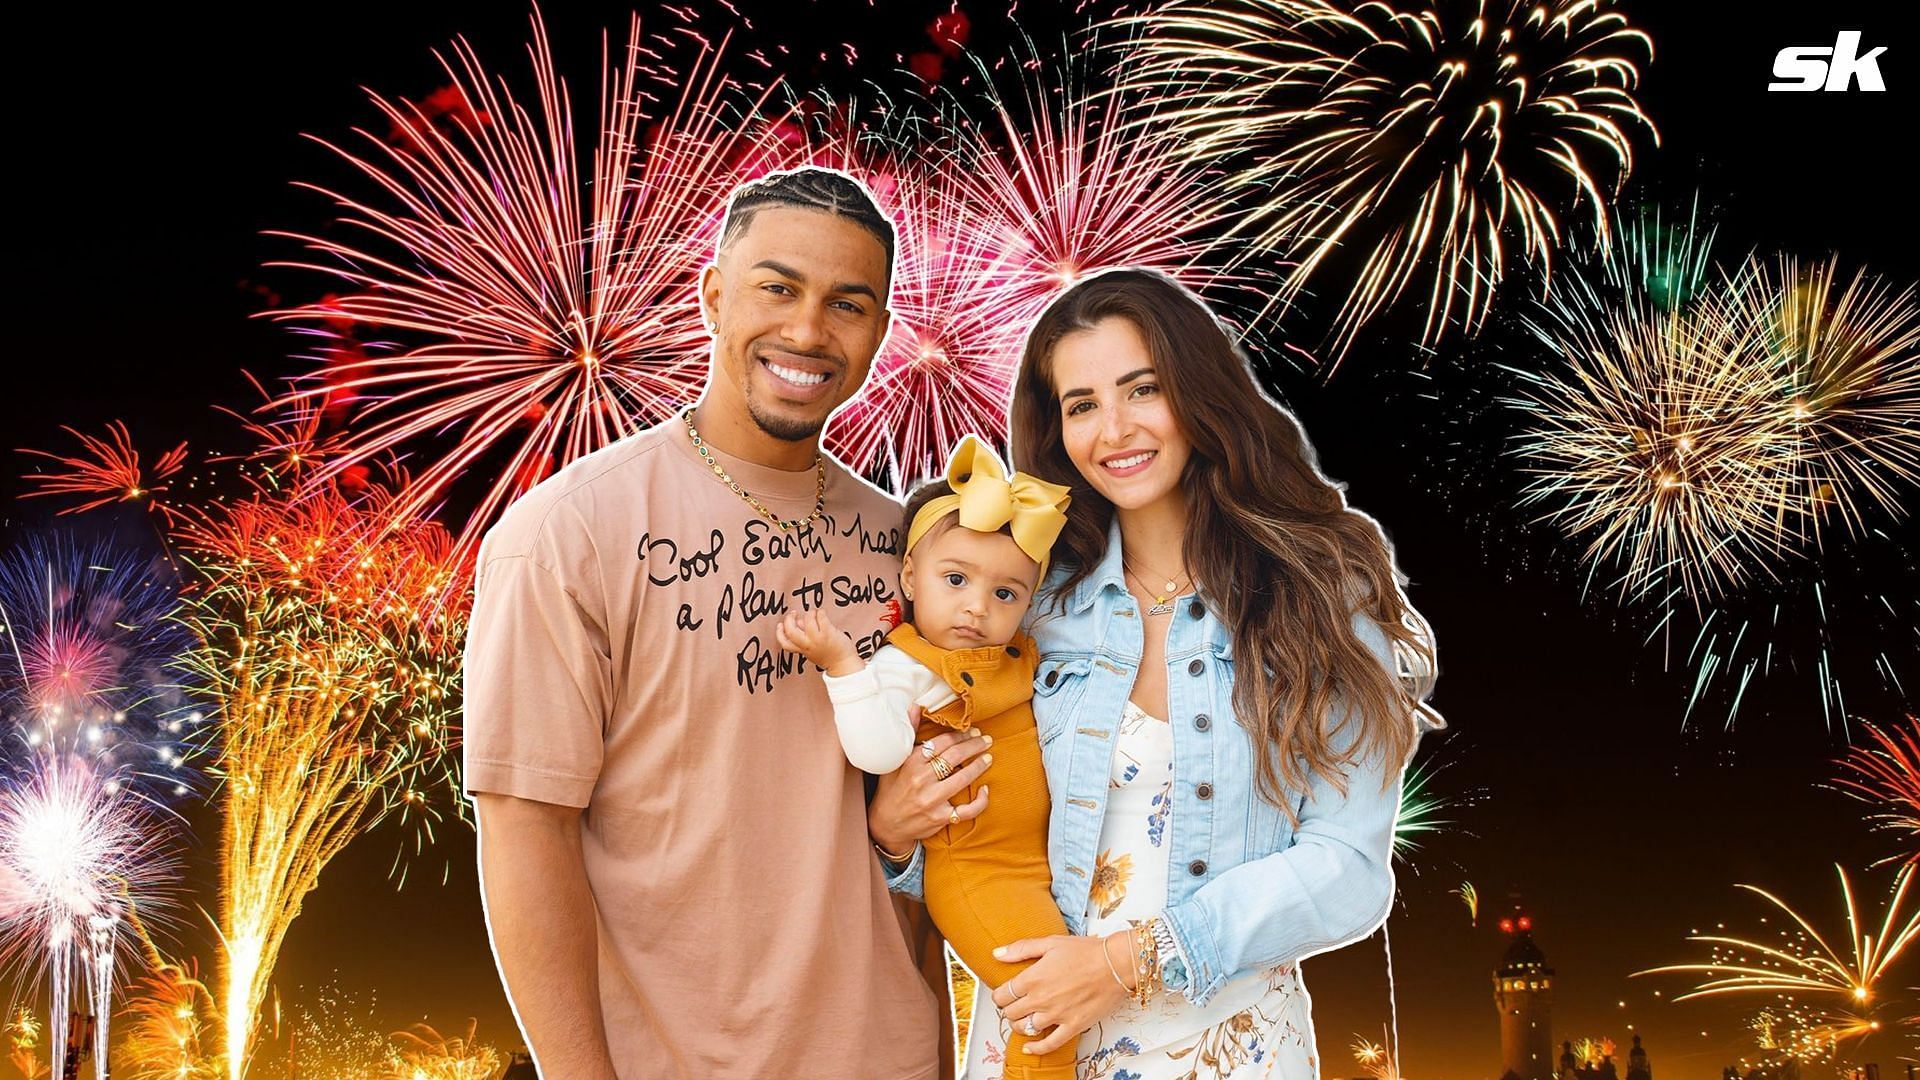 &quot;Mr. Smile and future MVP&quot; - Mets fans envision a great year for Francisco Lindor as star shortstop celebrates New Year with family